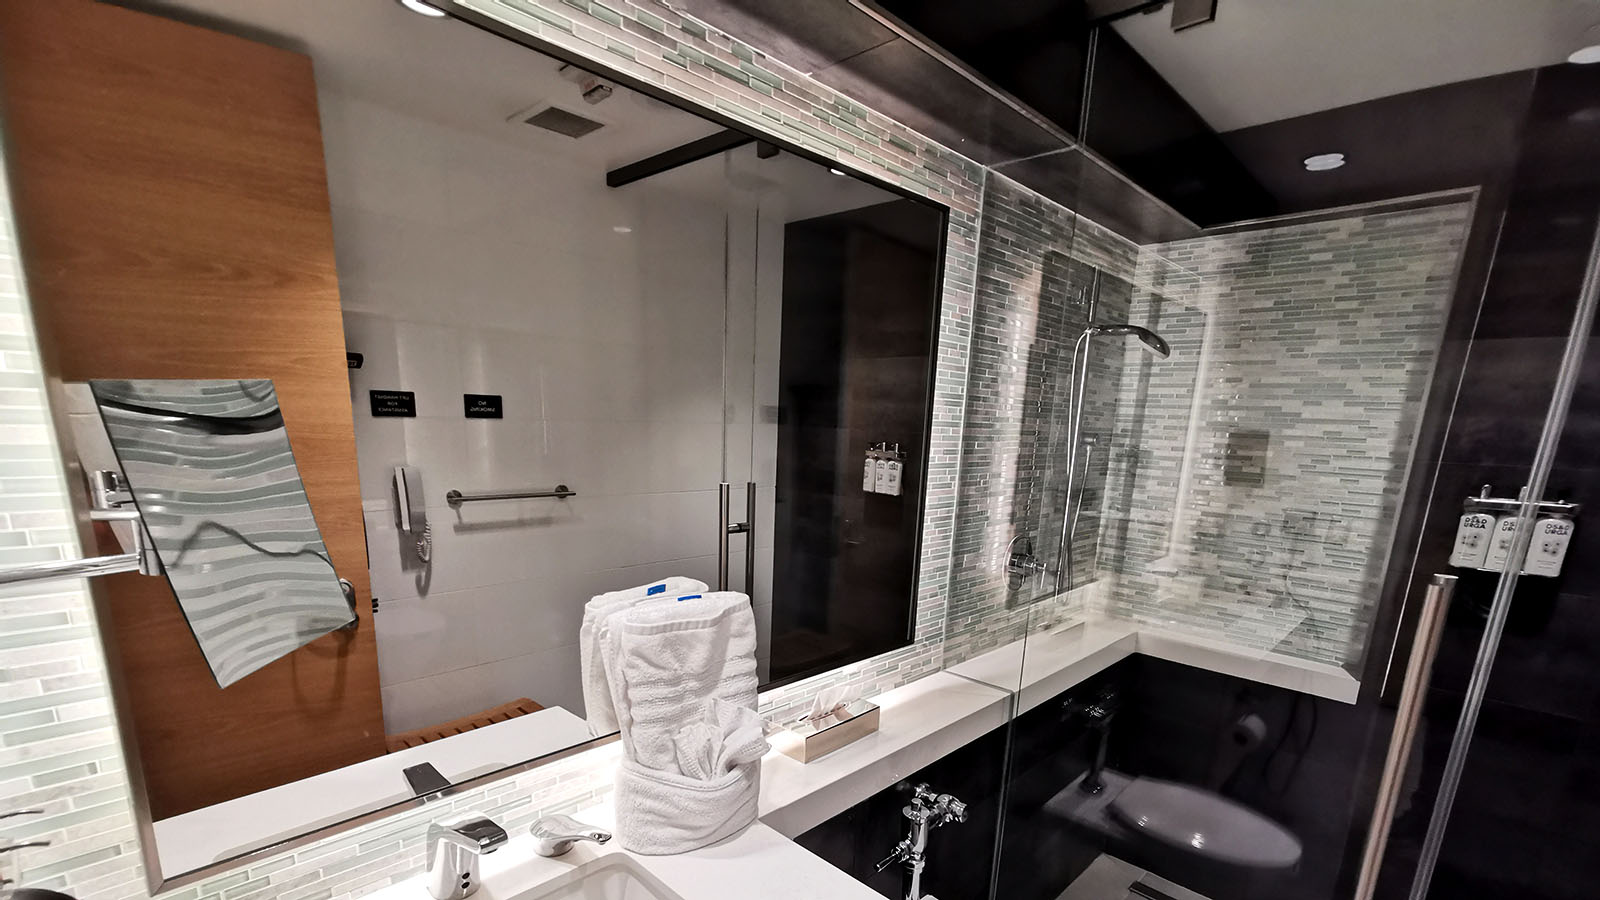 Bathroom in the American Airlines Flagship Lounge, Los Angeles